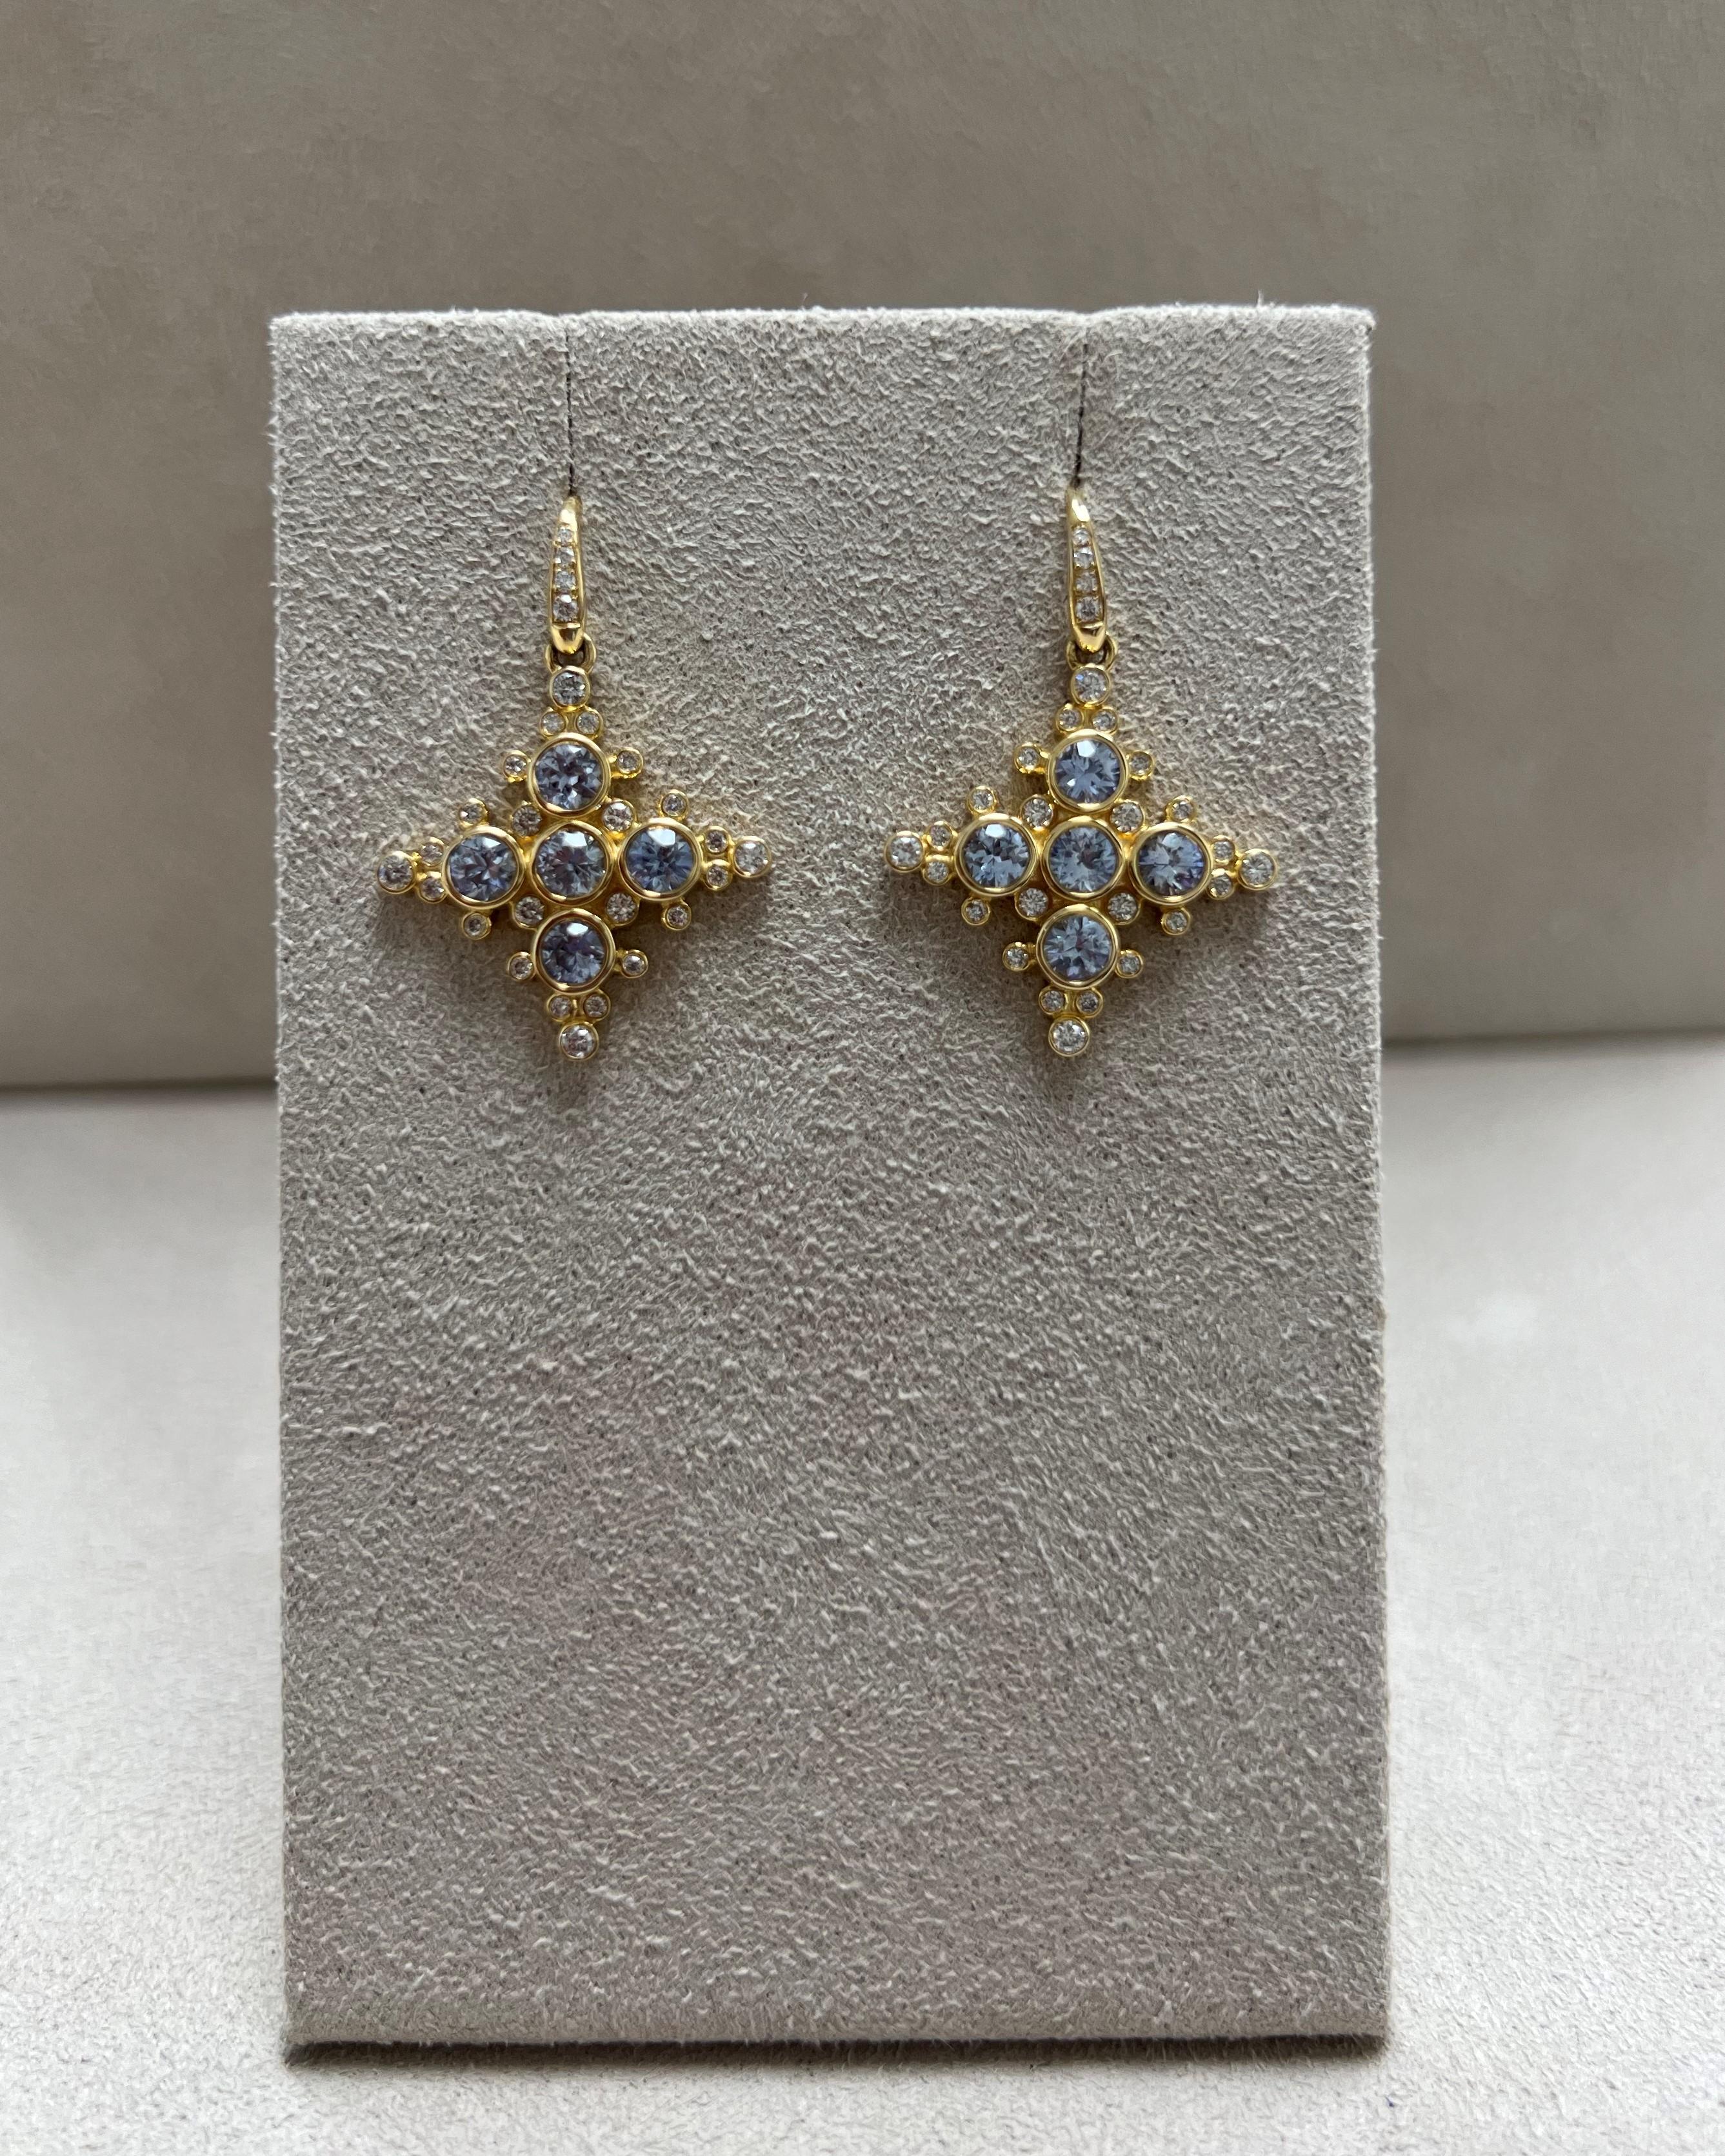 Created in 18 karat yellow gold
Blue sapphires 1.90 carats approx.
Diamonds 0.50 carat approx.
French wire for pierced ears
Limited edition

The earrings, a limited edition design, have been crafted in 18 karat yellow gold and feature 1.90 carats of